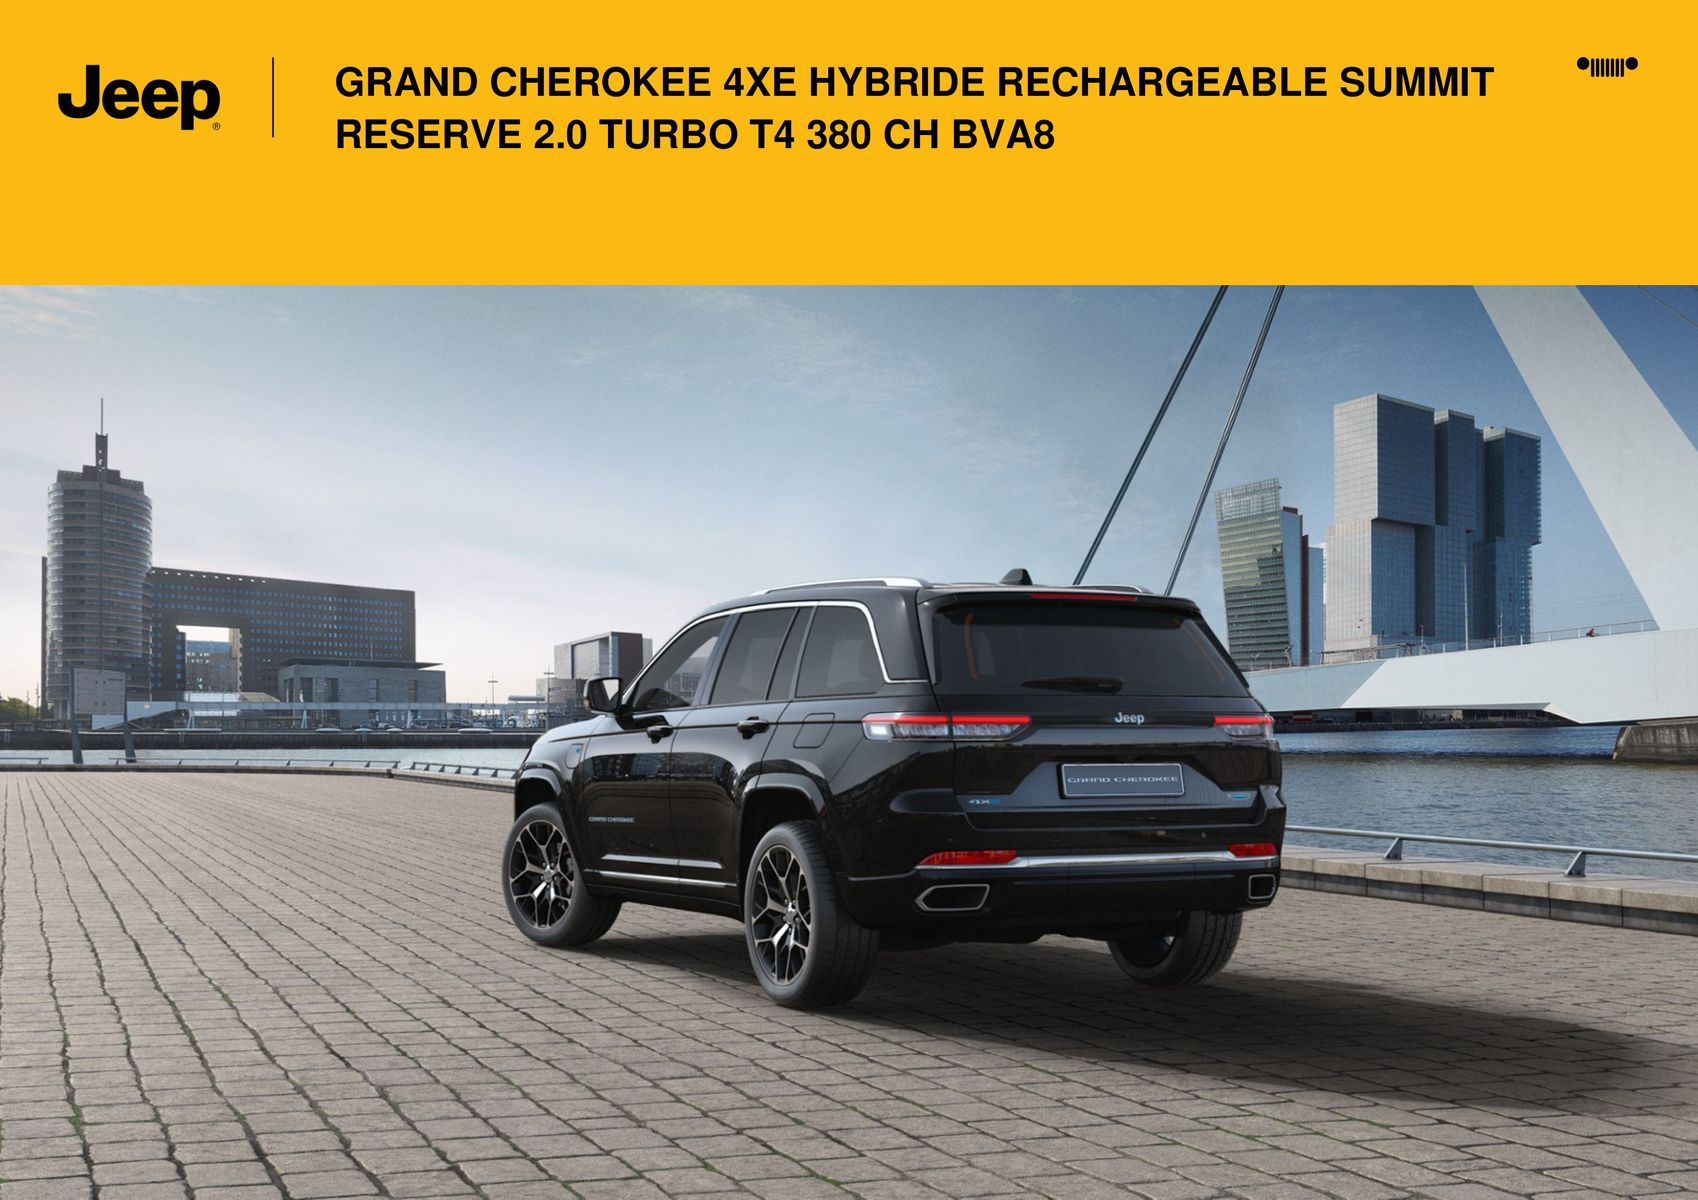 Catalogue GRAND CHEROKEE 4XE HYBRIDE RECHARGEABLE SUMMIT RESERVE 2.0 TURBO T4 380 CH BVA8_, page 00014